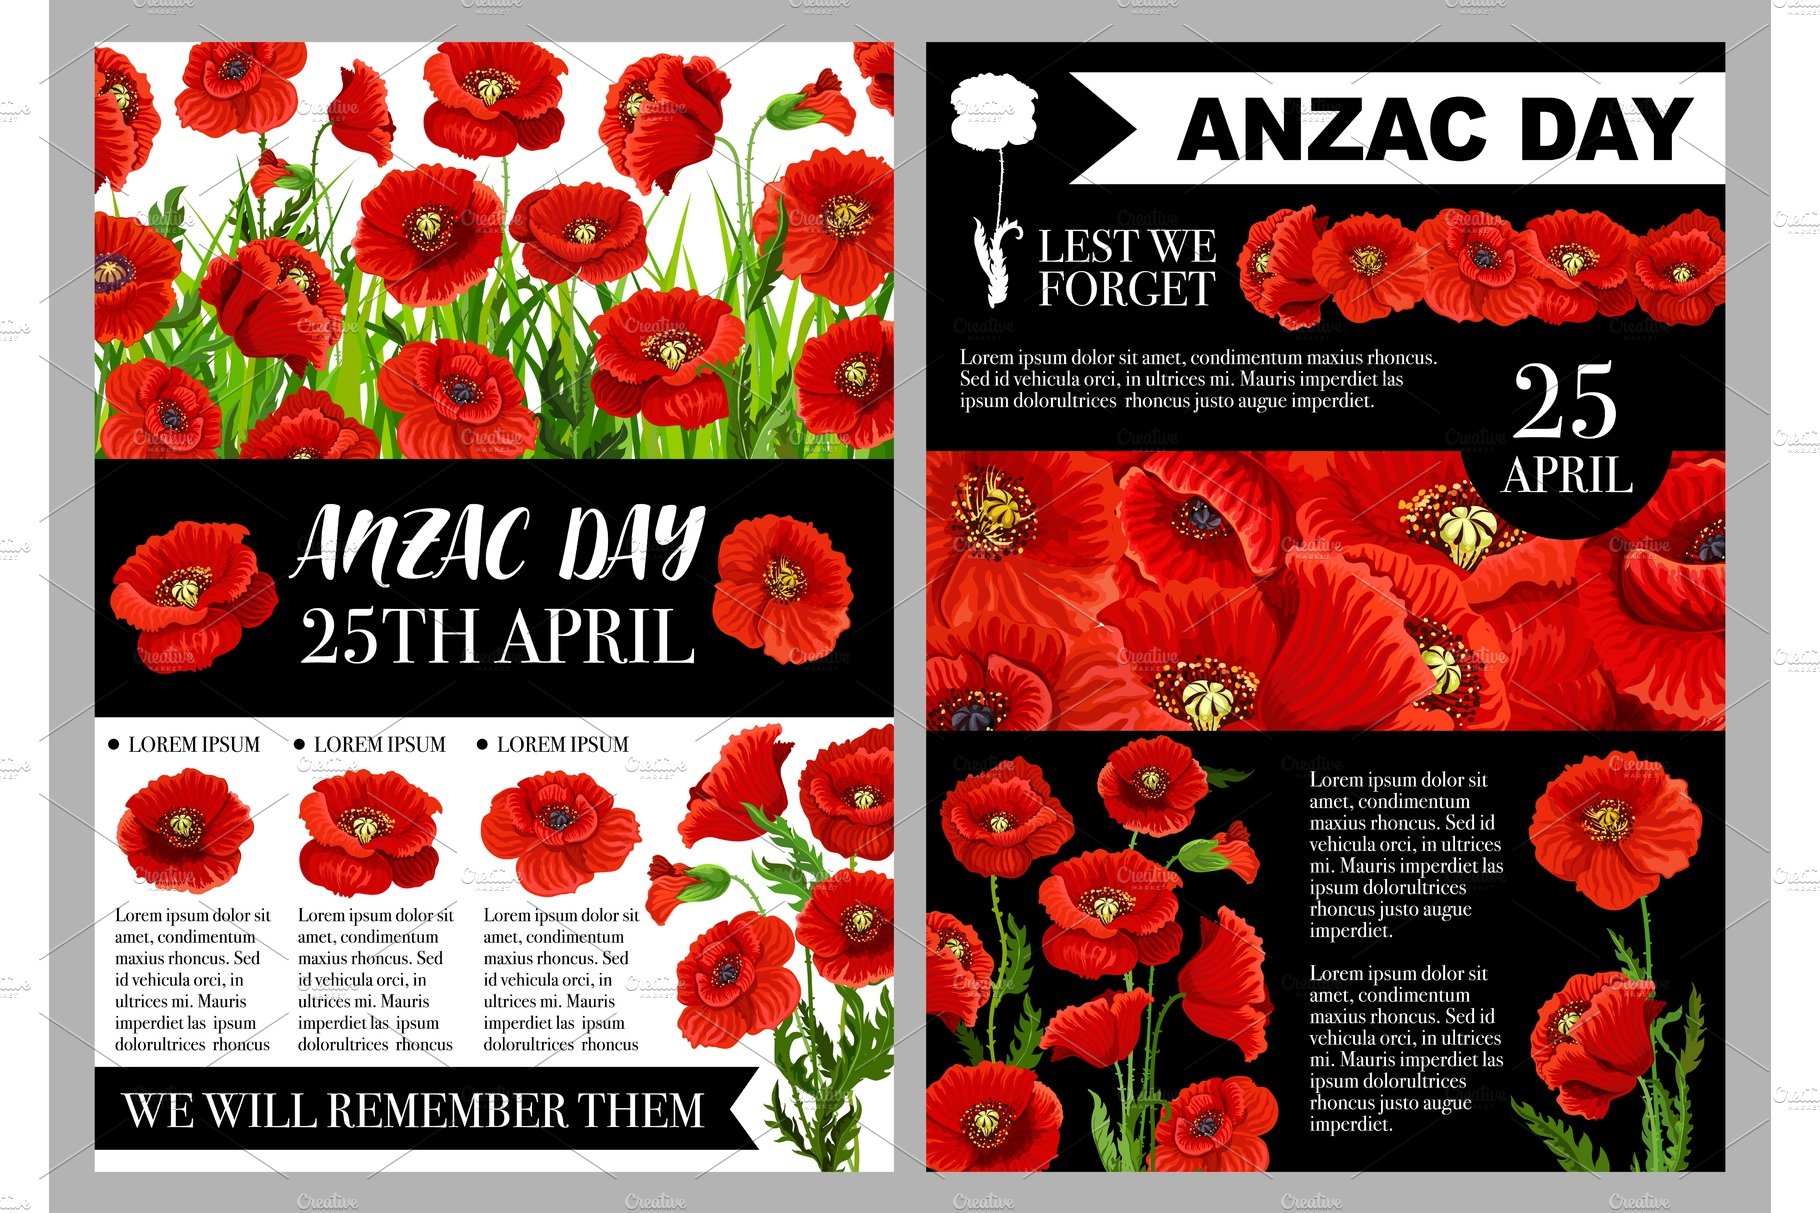 Anzac Day 25 April holiday vector posters cover image.